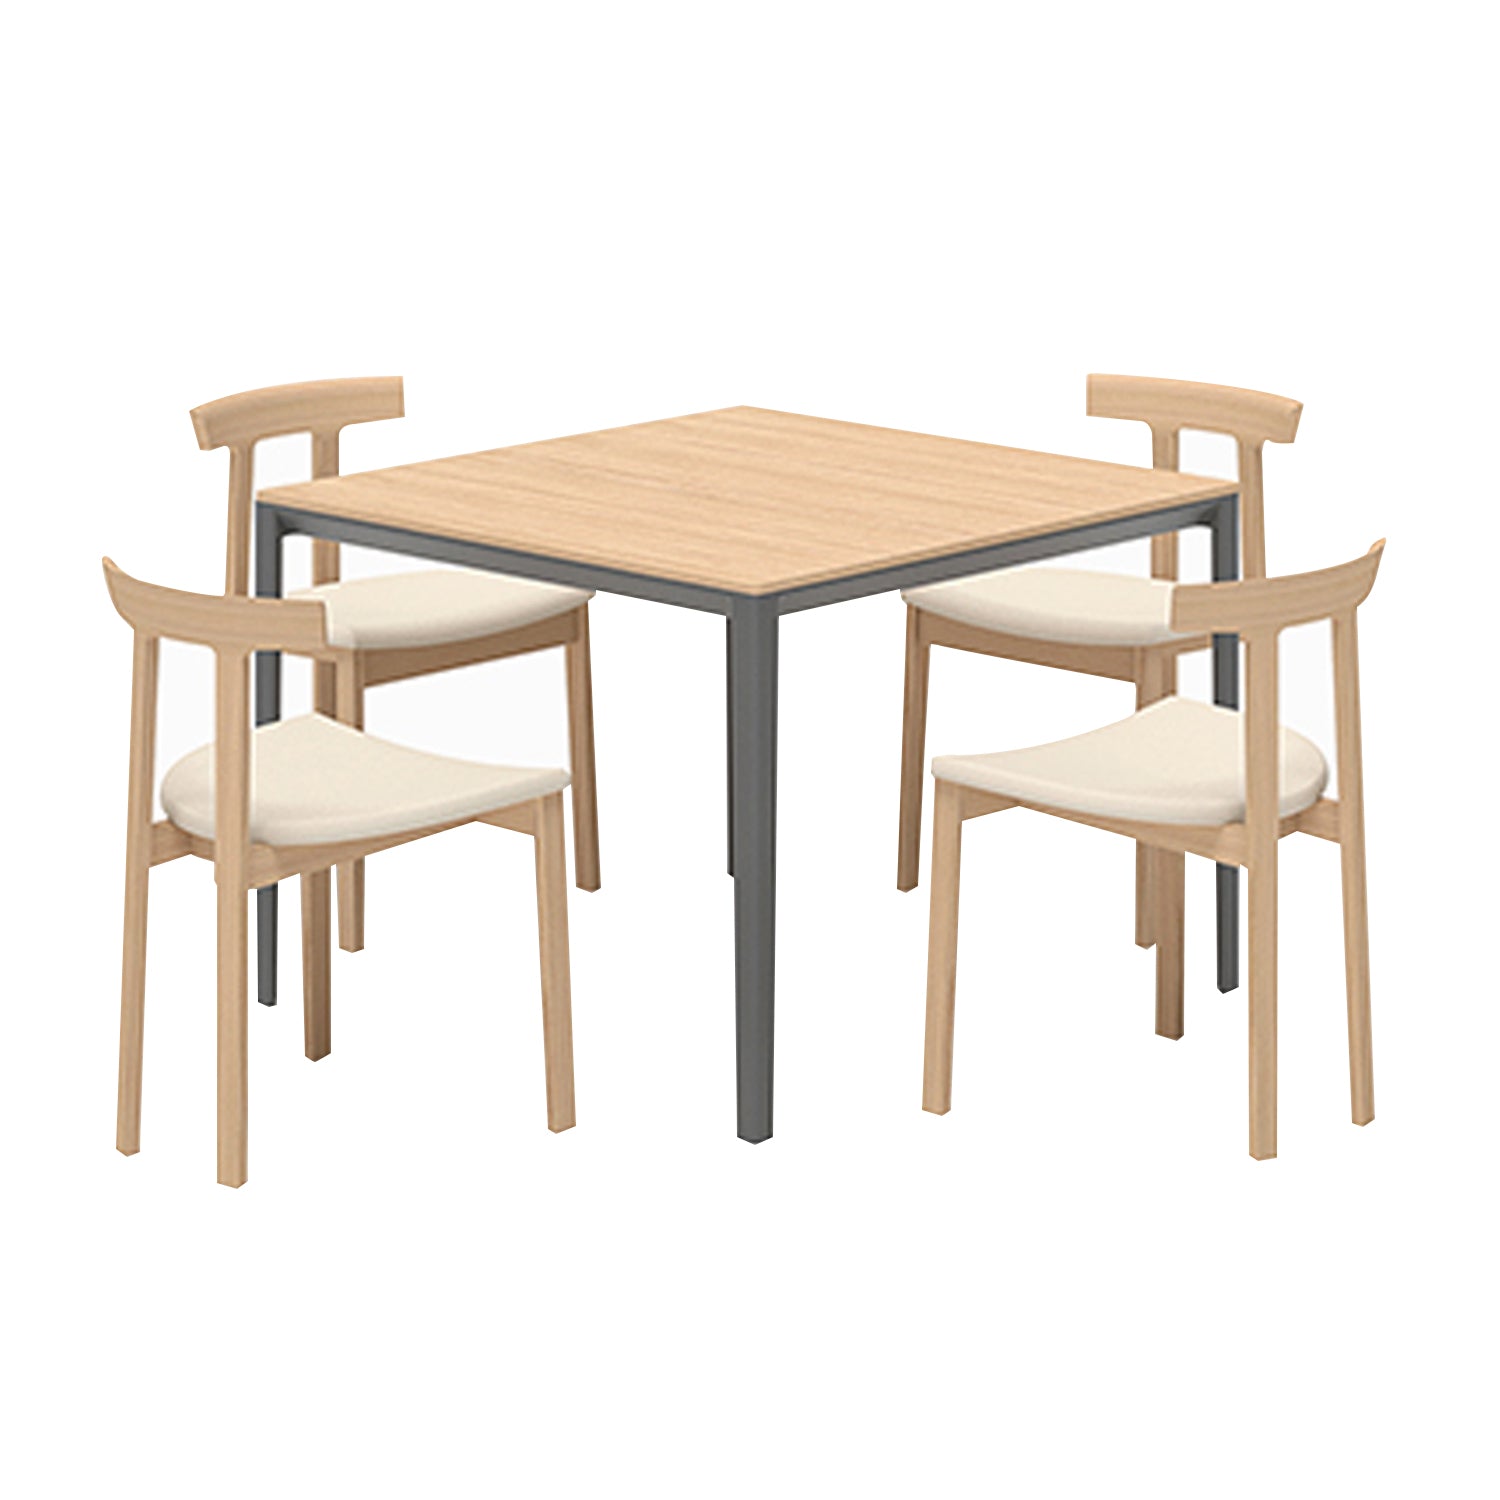 Able Dining Table: Square